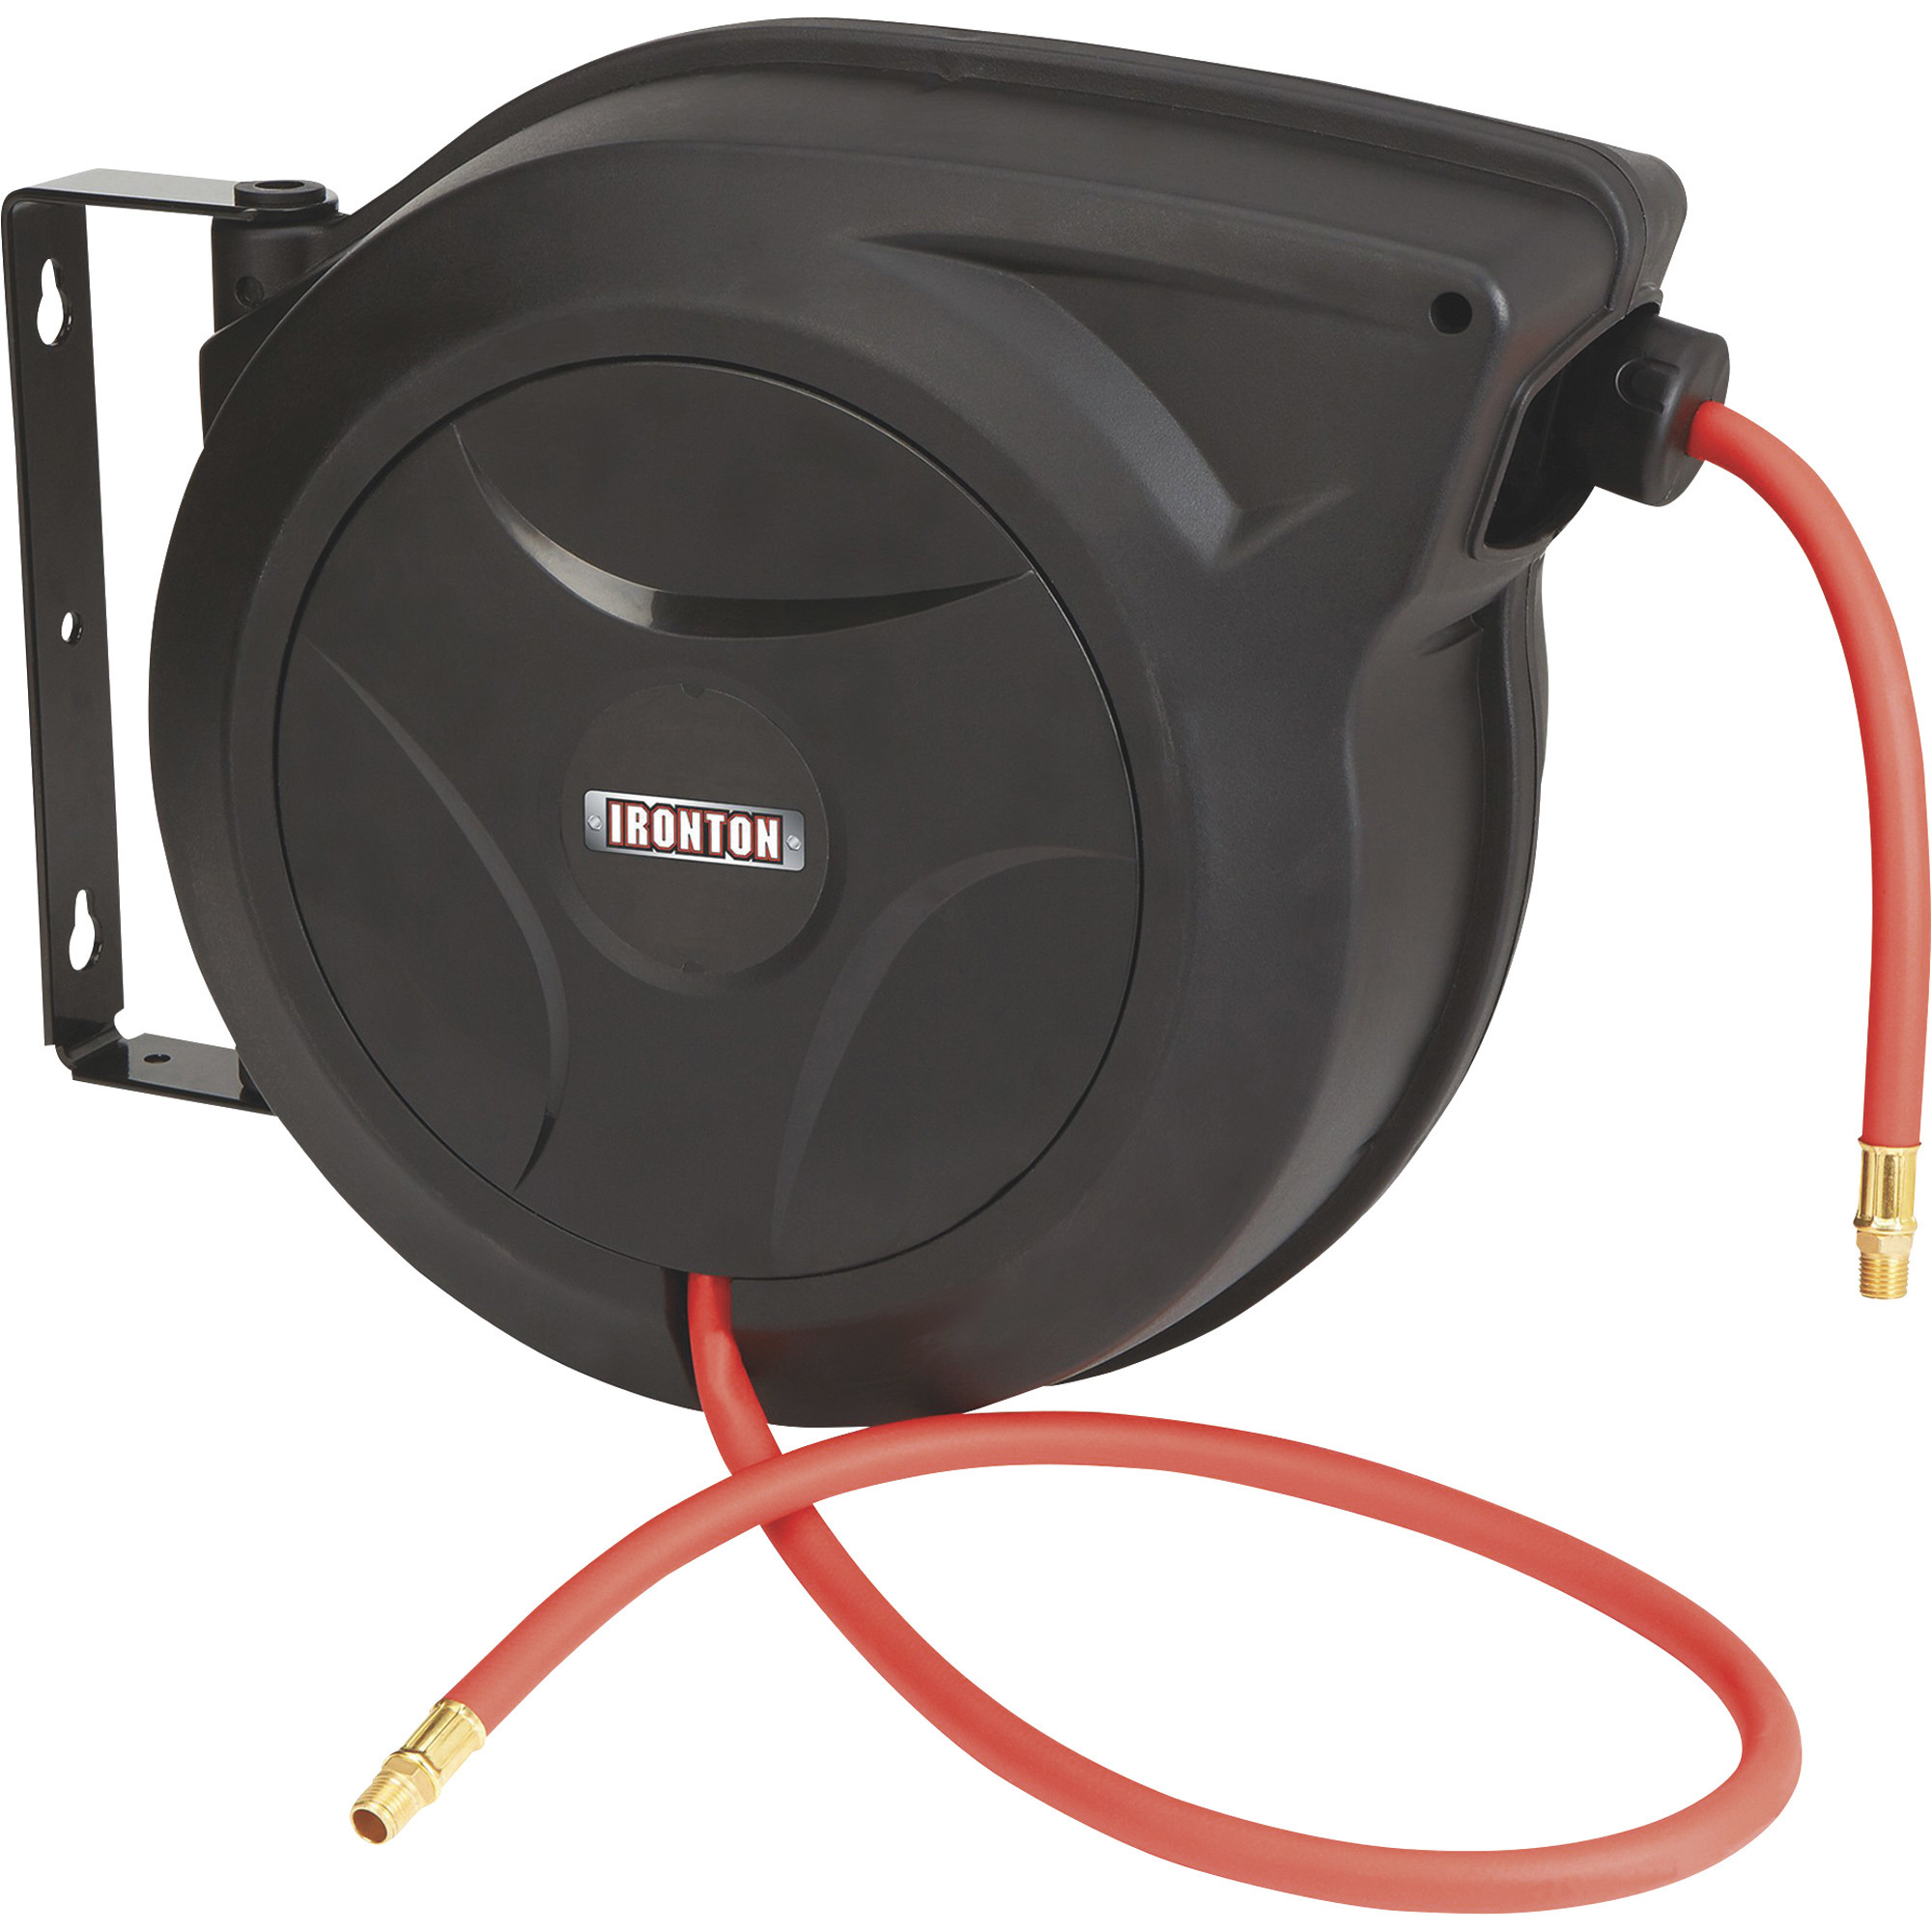 Ironton Retractable Auto Return Hose Reel with 3/8inch x 50ft. Hybrid Polymer Hose, 300 PSI 27807153